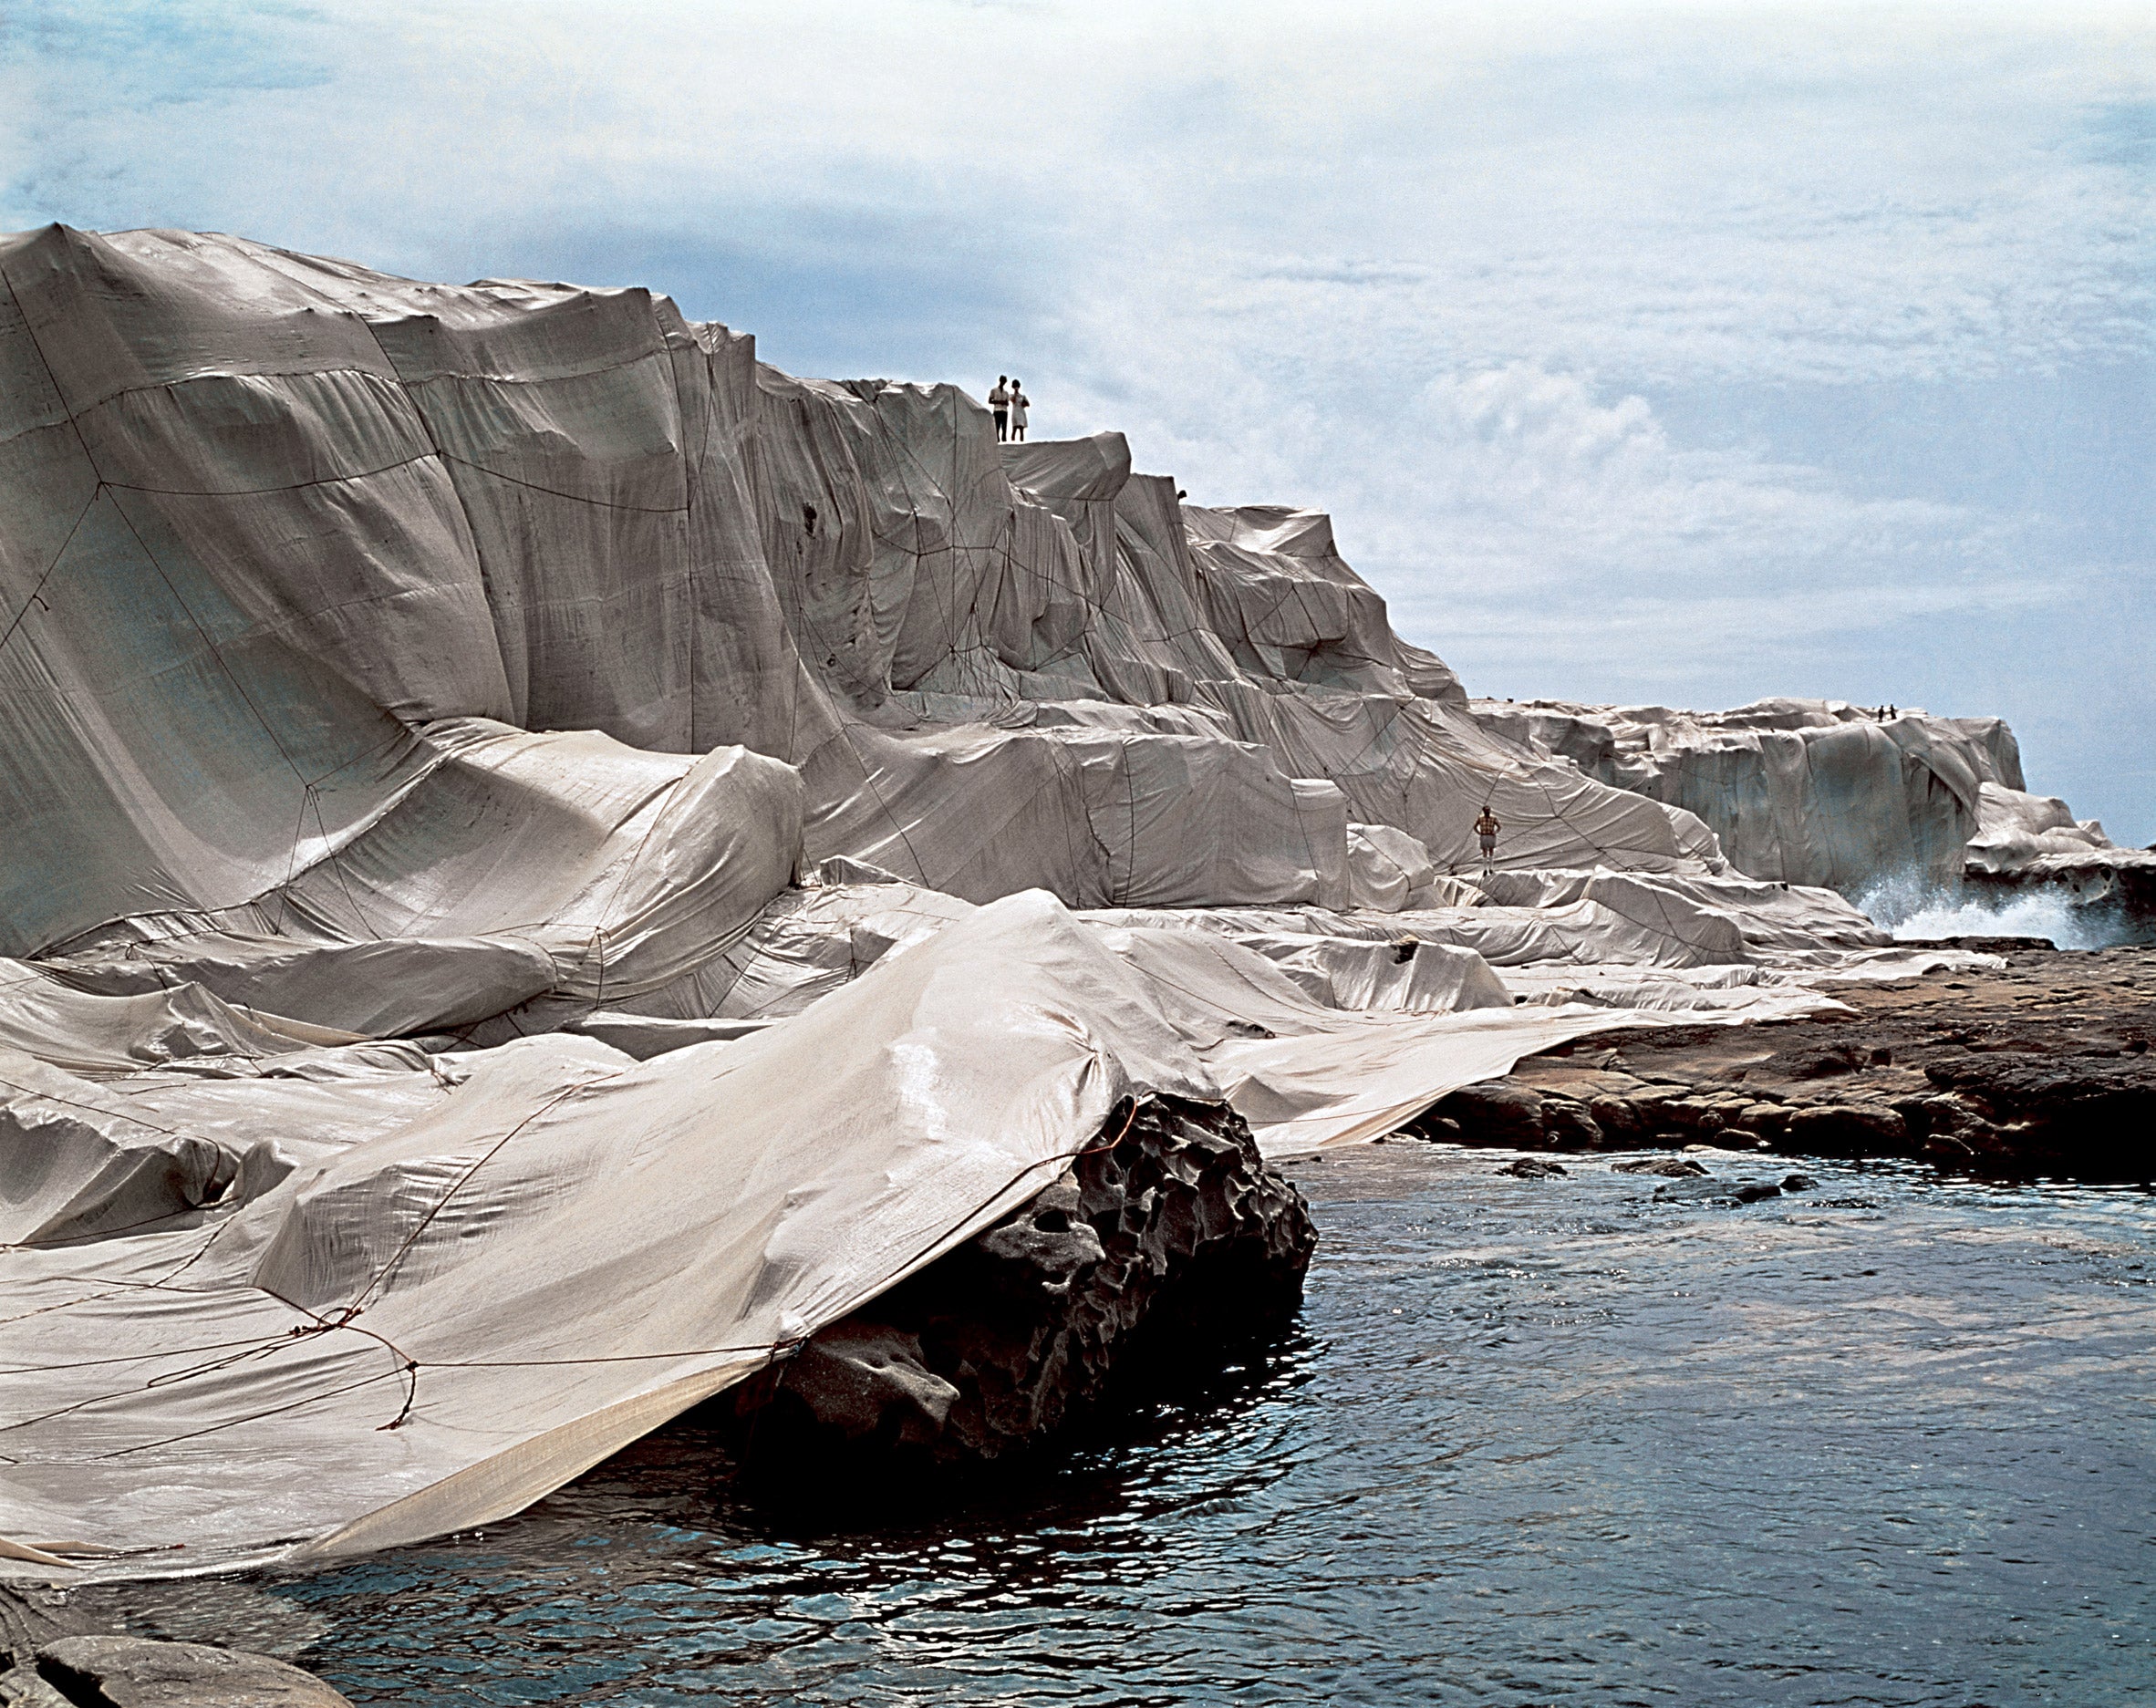 Wrapped Coast by Christo and Jeanne Claude, One Million Square Feet, Little Bay, Sydney, Australia, 1969